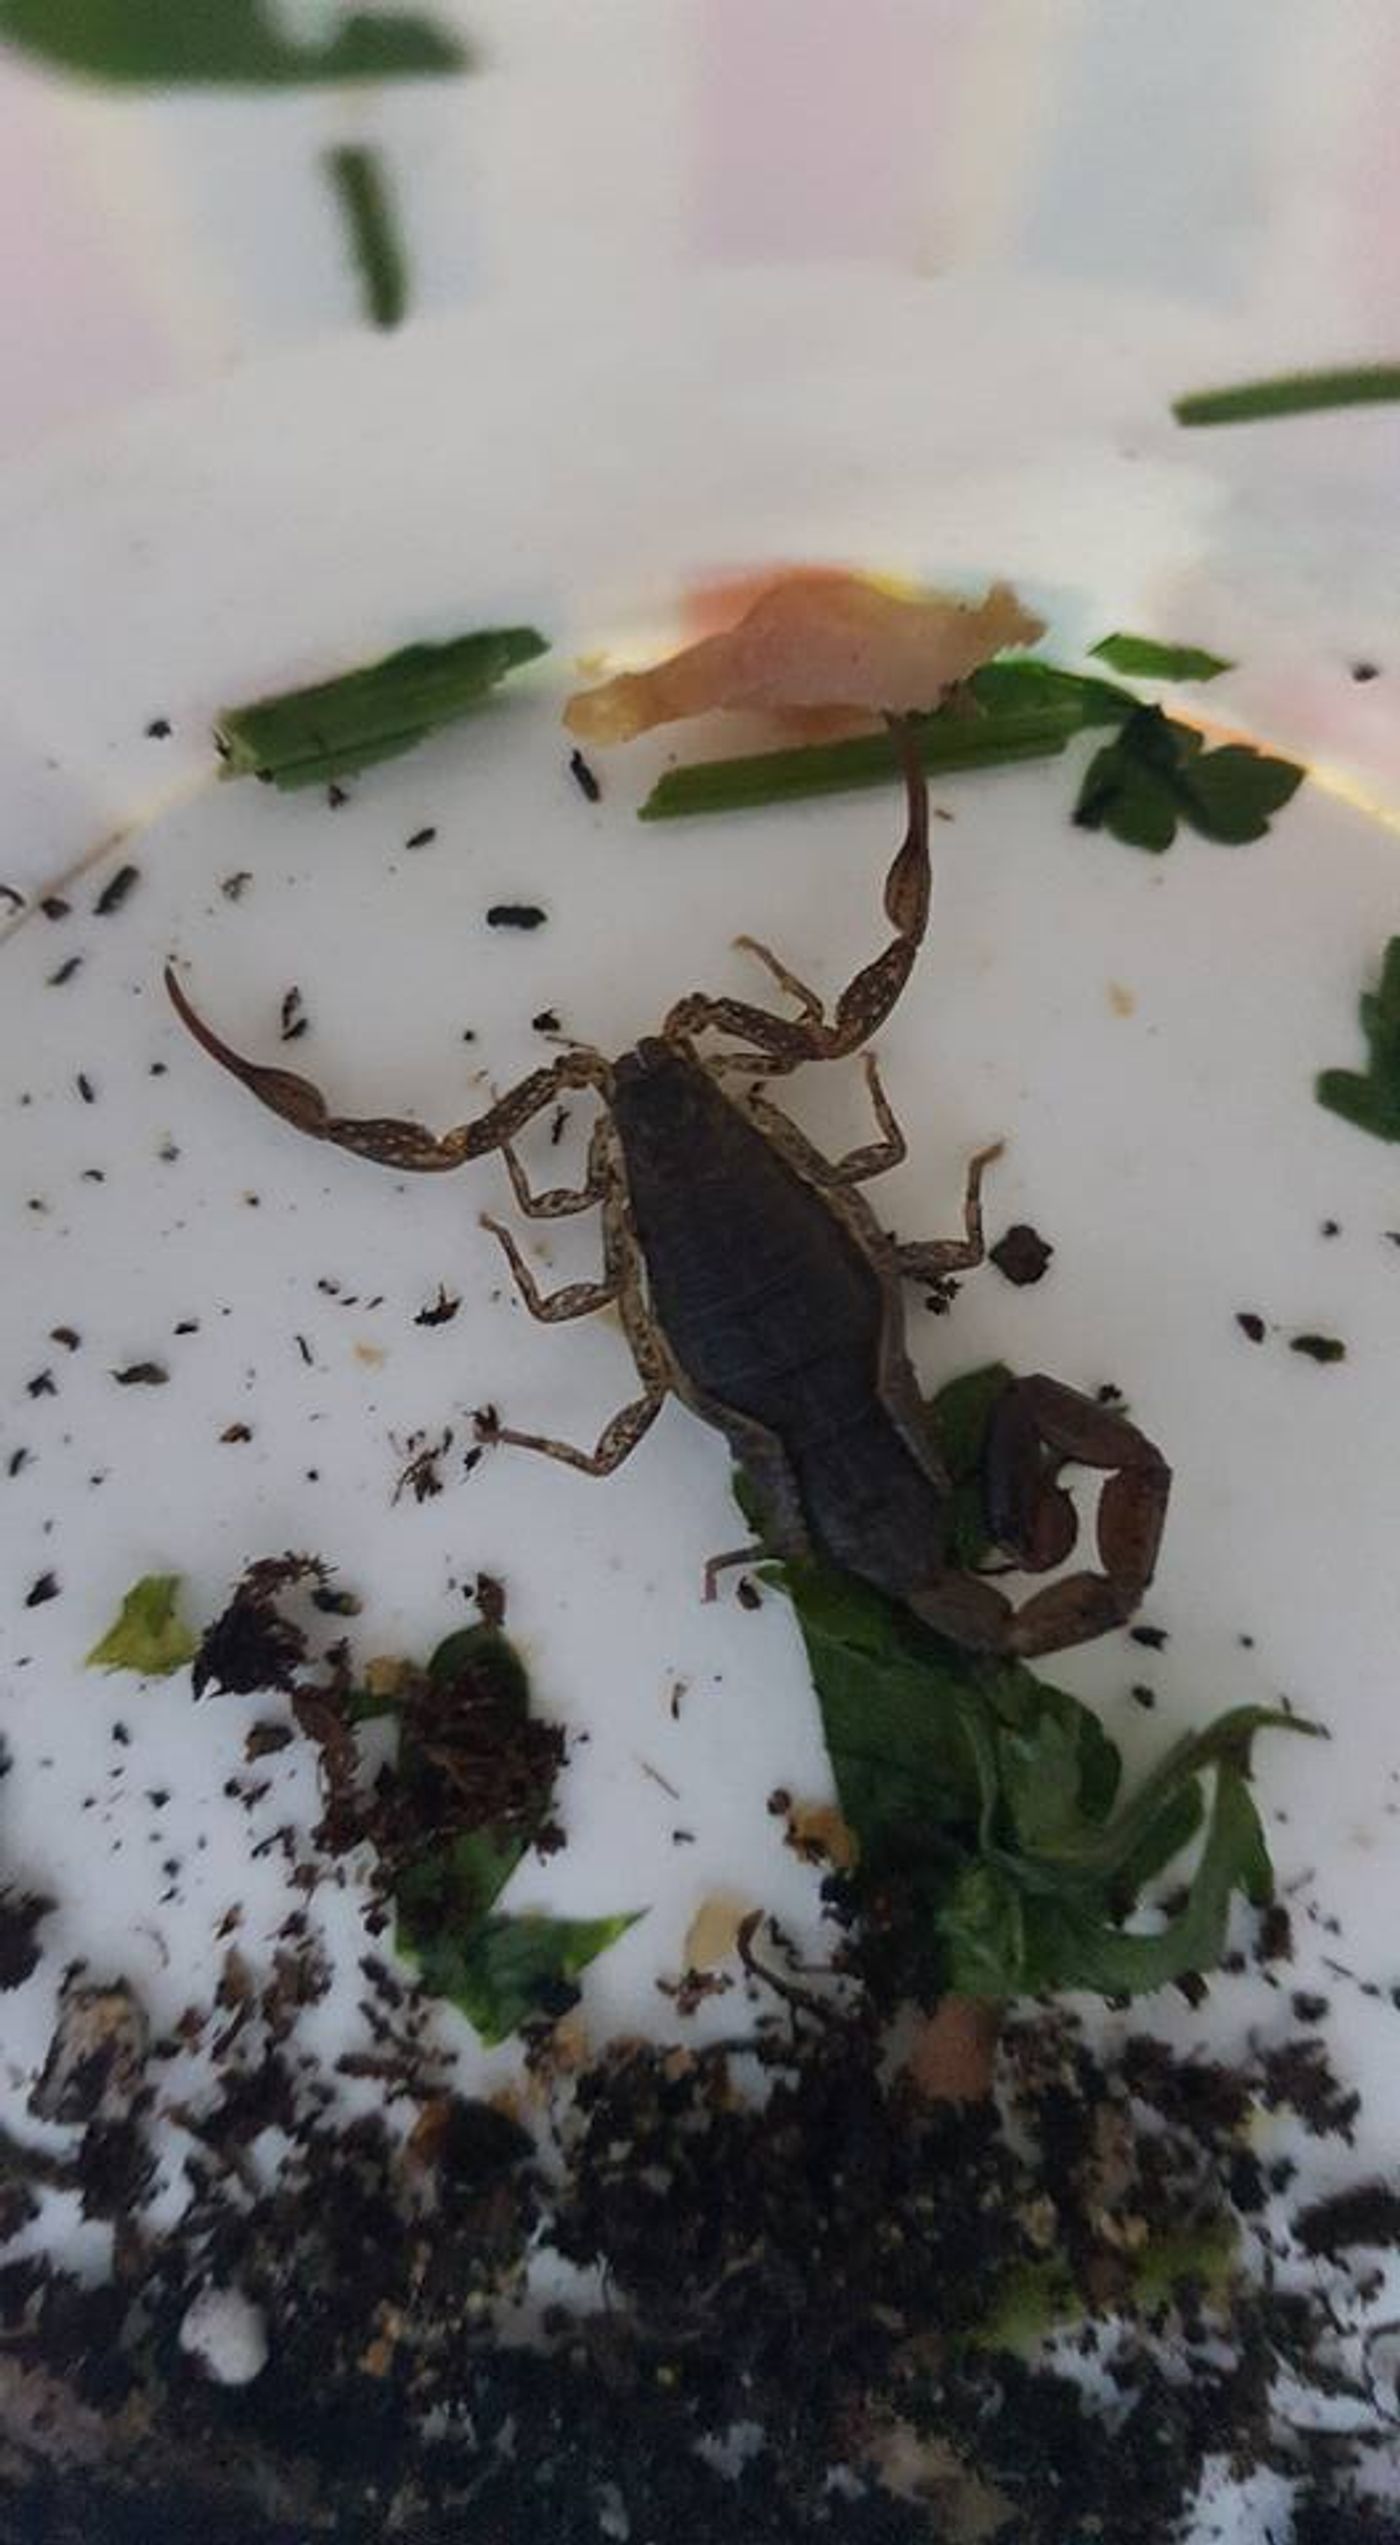 This scorpion was removed from a London train after finding its way out of a passenger's bag.